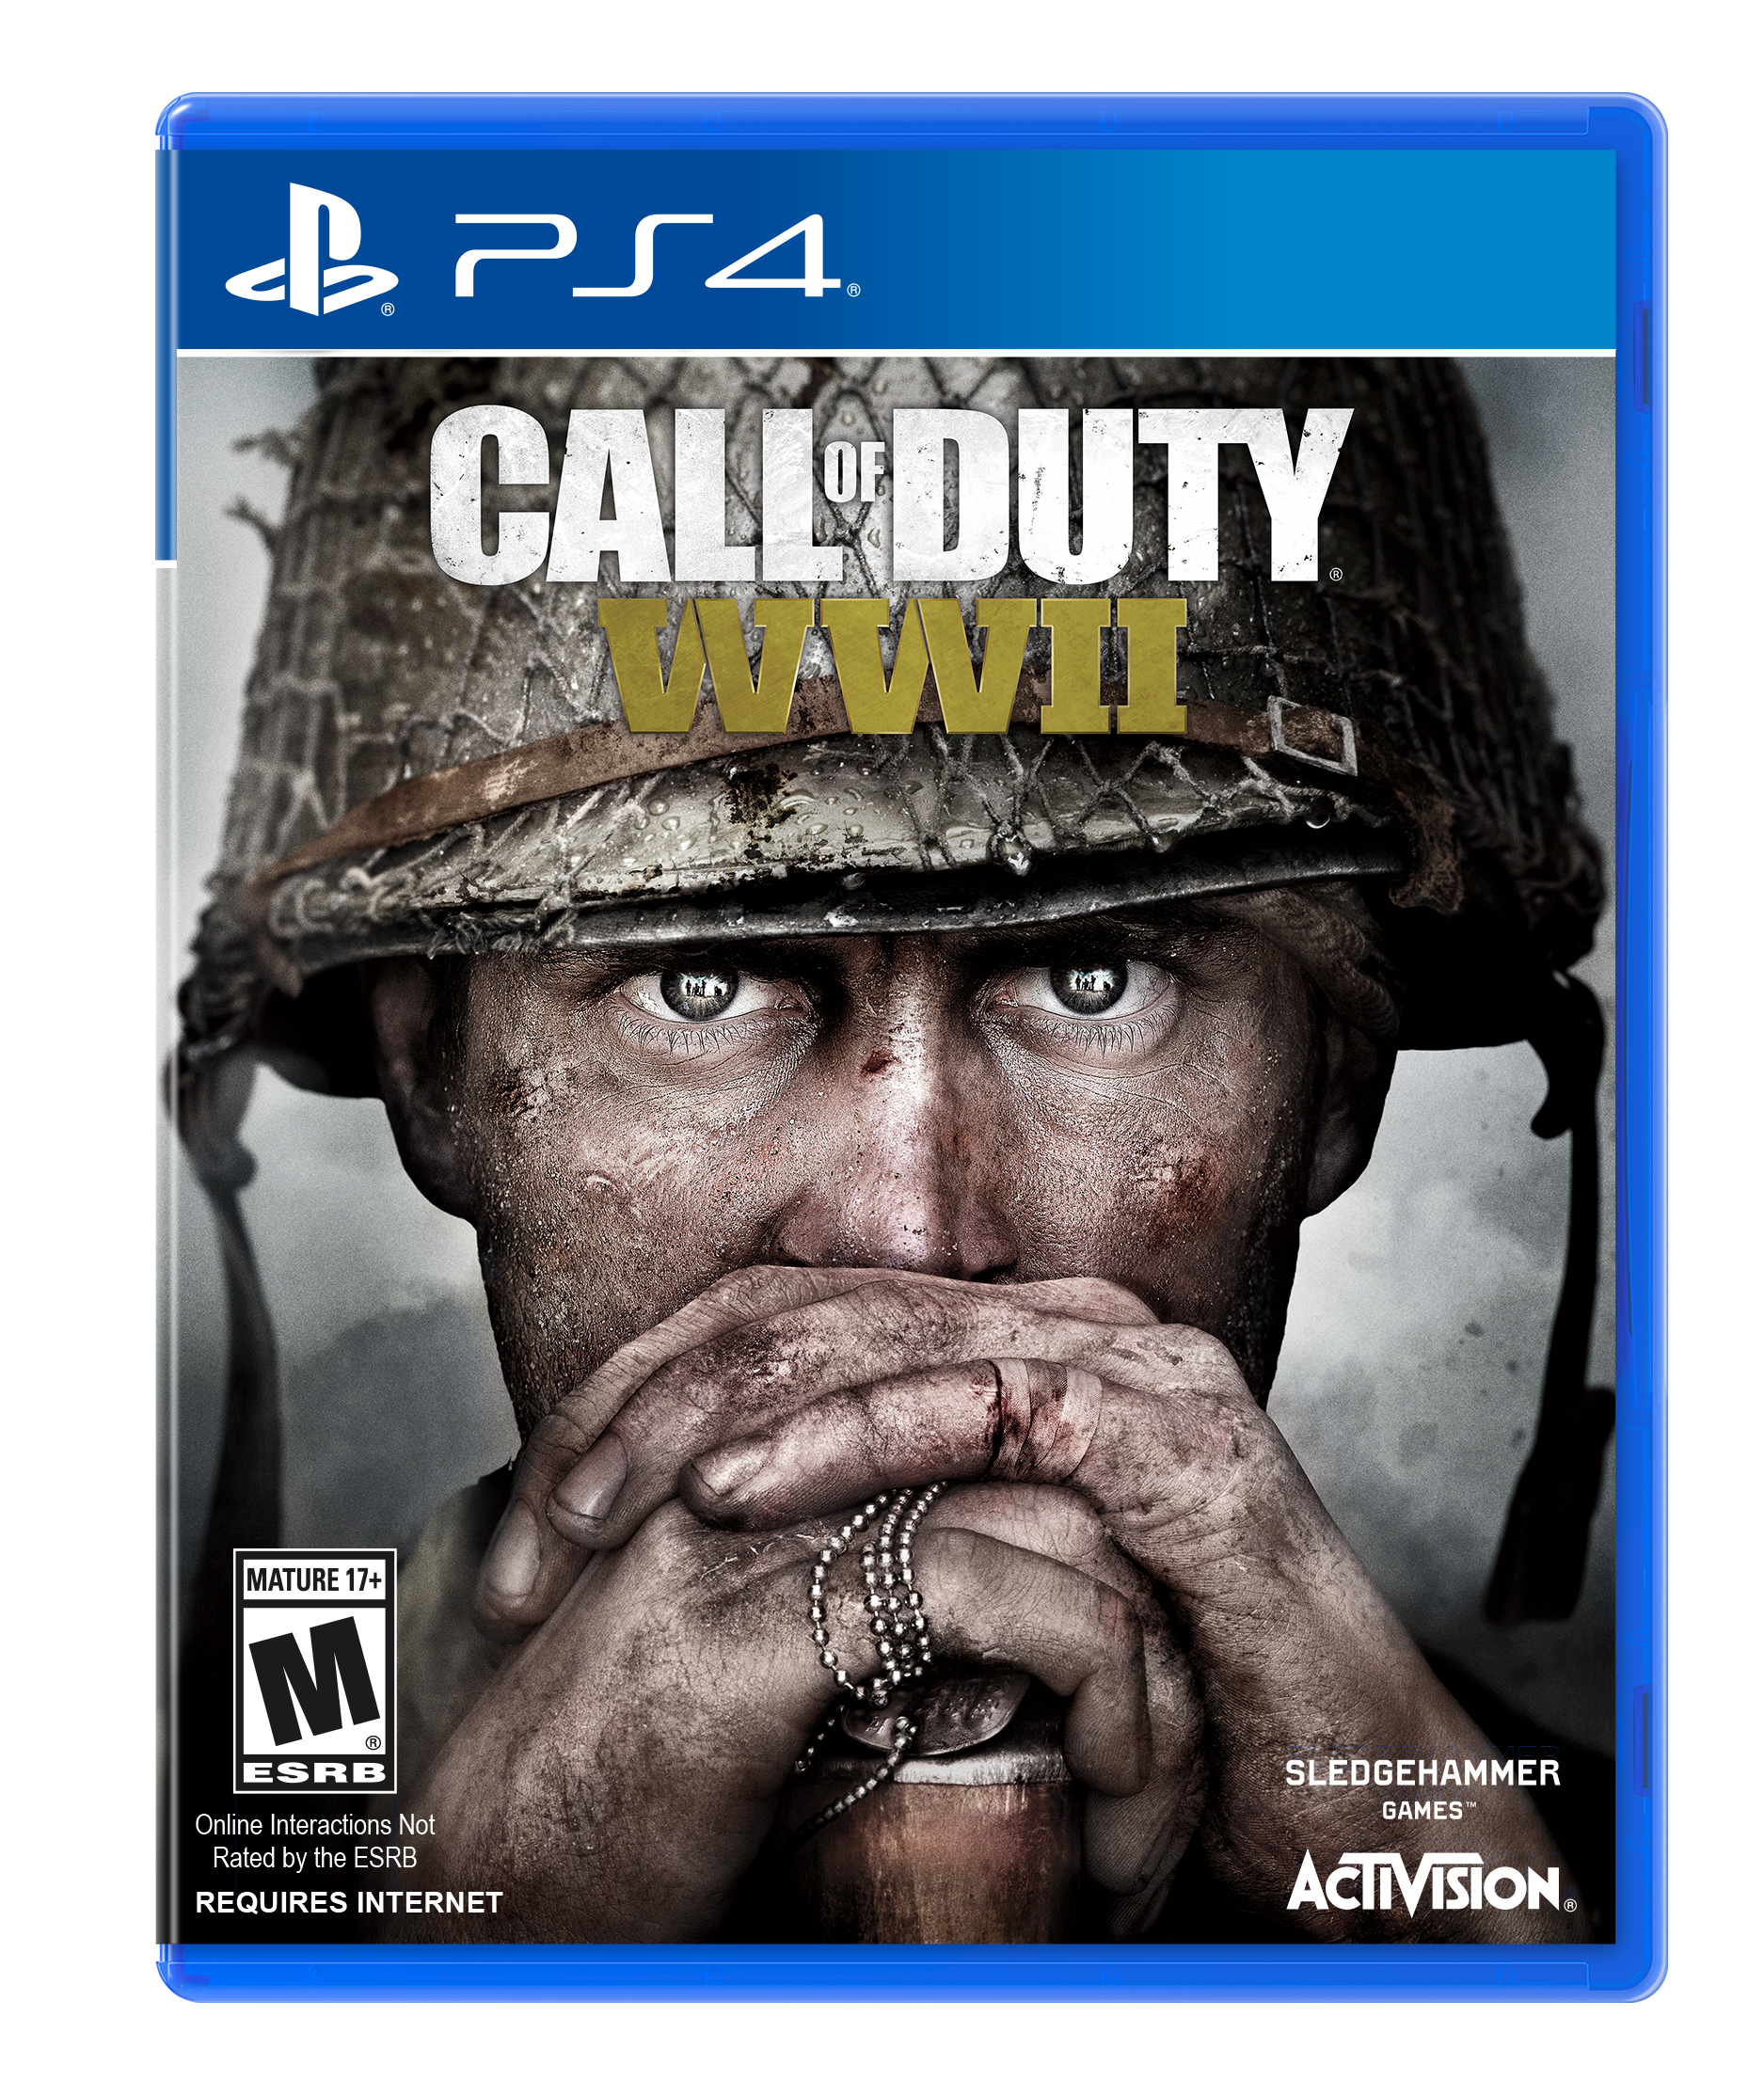 flyde Investere kranium Call of Duty: WWII - PlayStation 4 | PlayStation 4 | GameStop